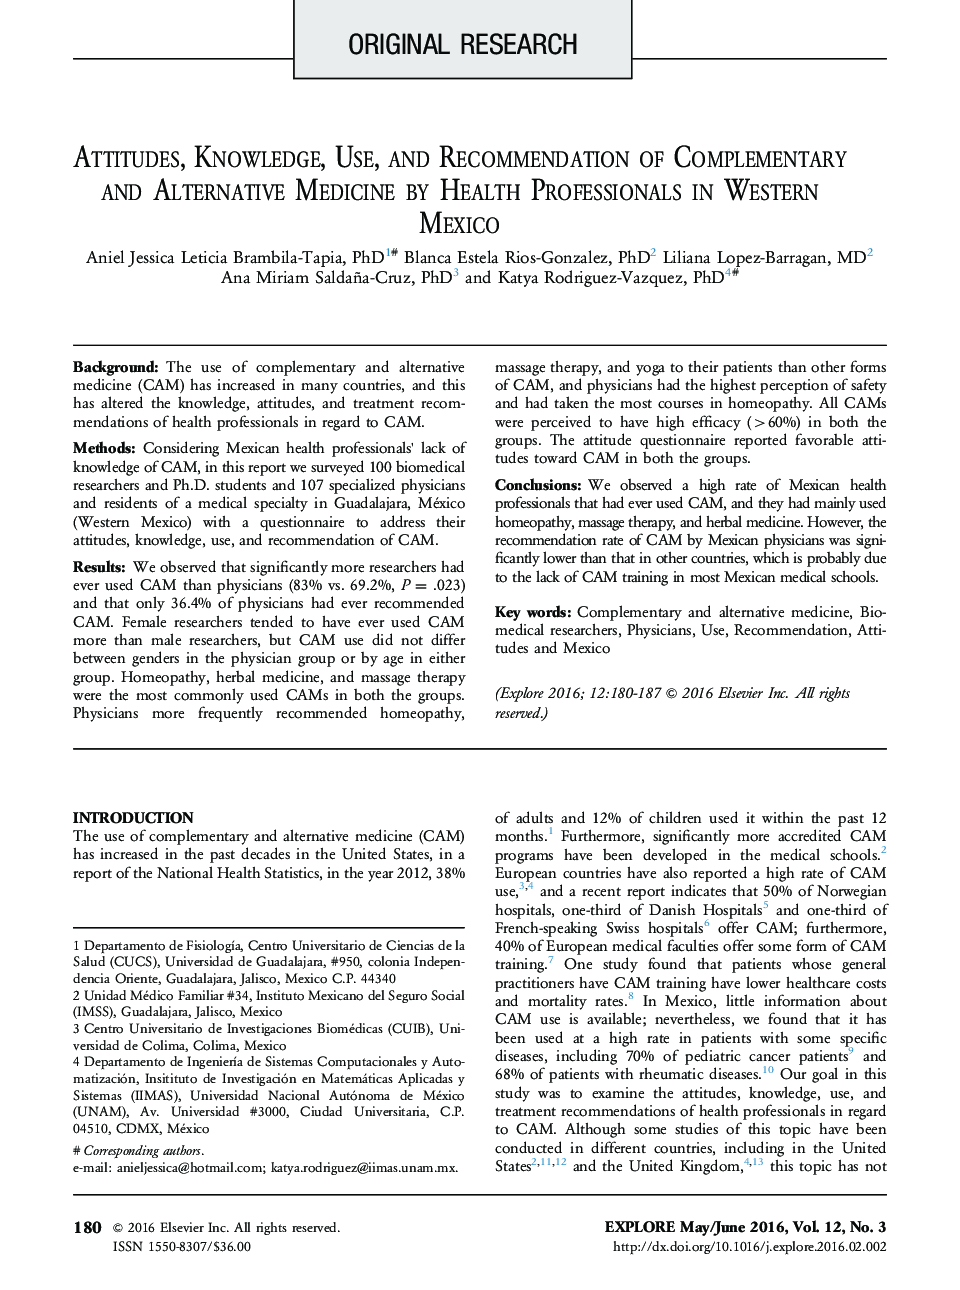 Attitudes, Knowledge, Use, and Recommendation of Complementary and Alternative Medicine by Health Professionals in Western Mexico